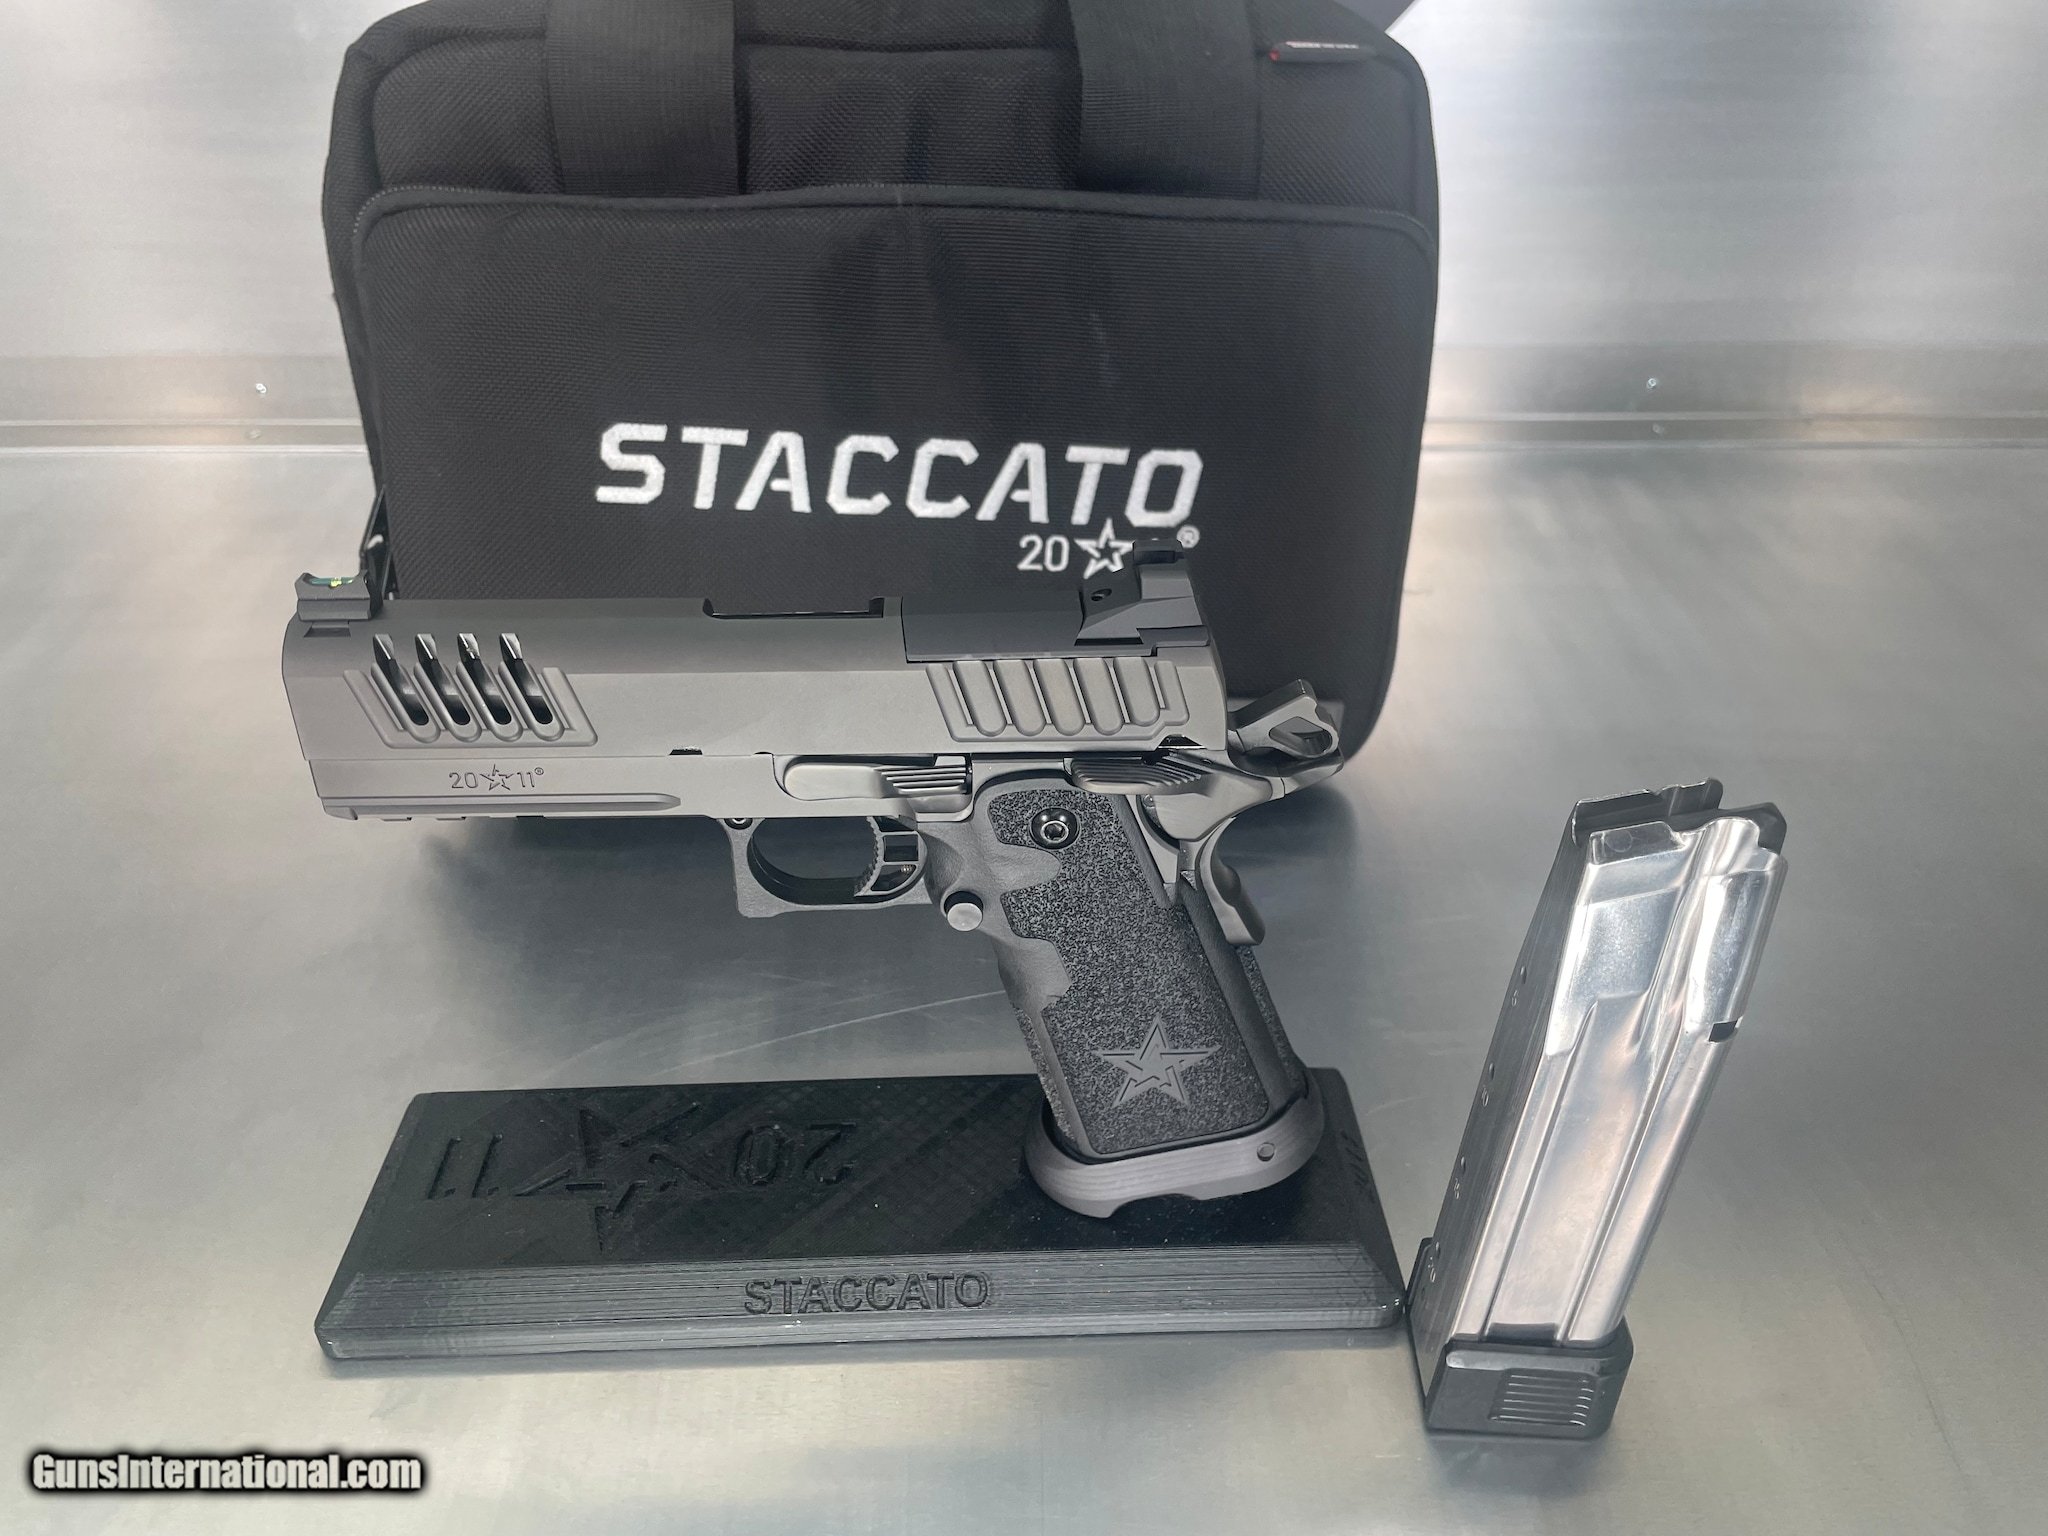 Staccato 2011 Handguns, Pistols, & Accessories. Built For Heroes